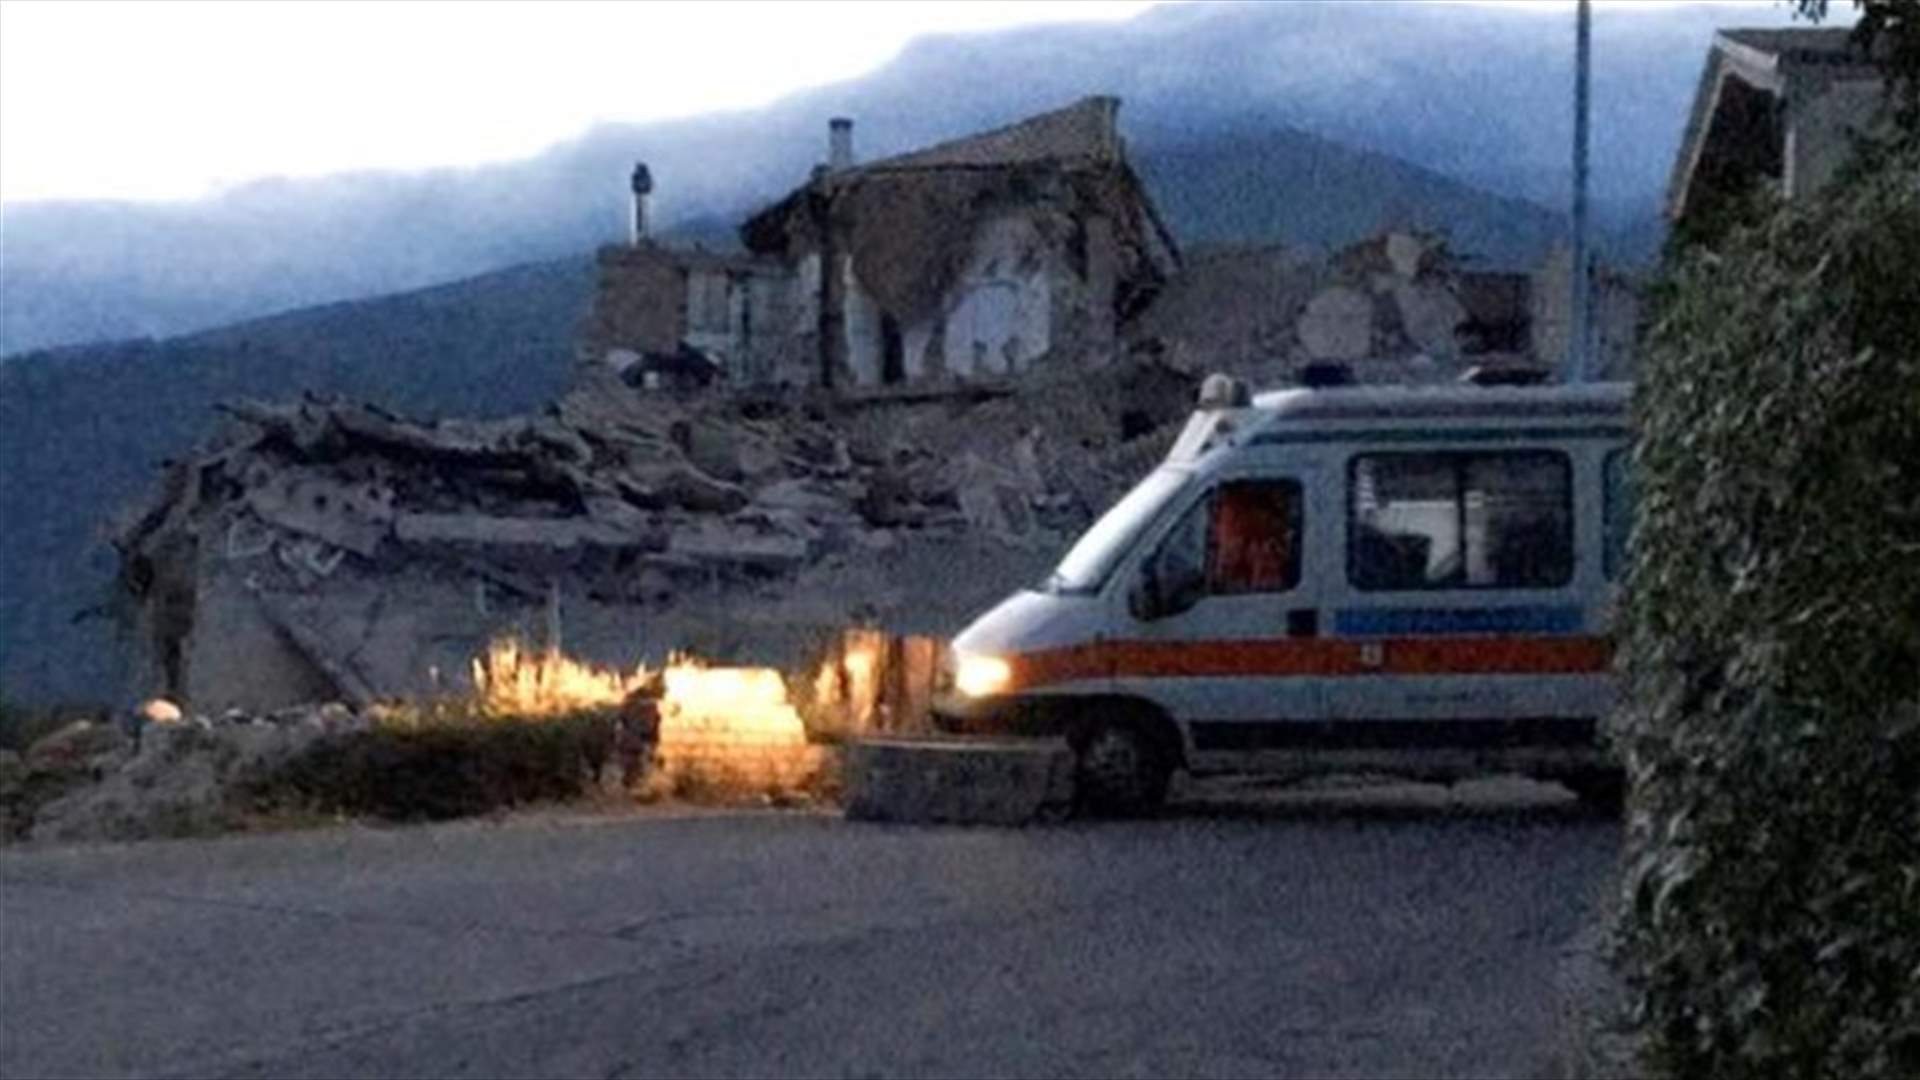 [PHOTOS] Death toll in Italian earthquake rises to 73 -official